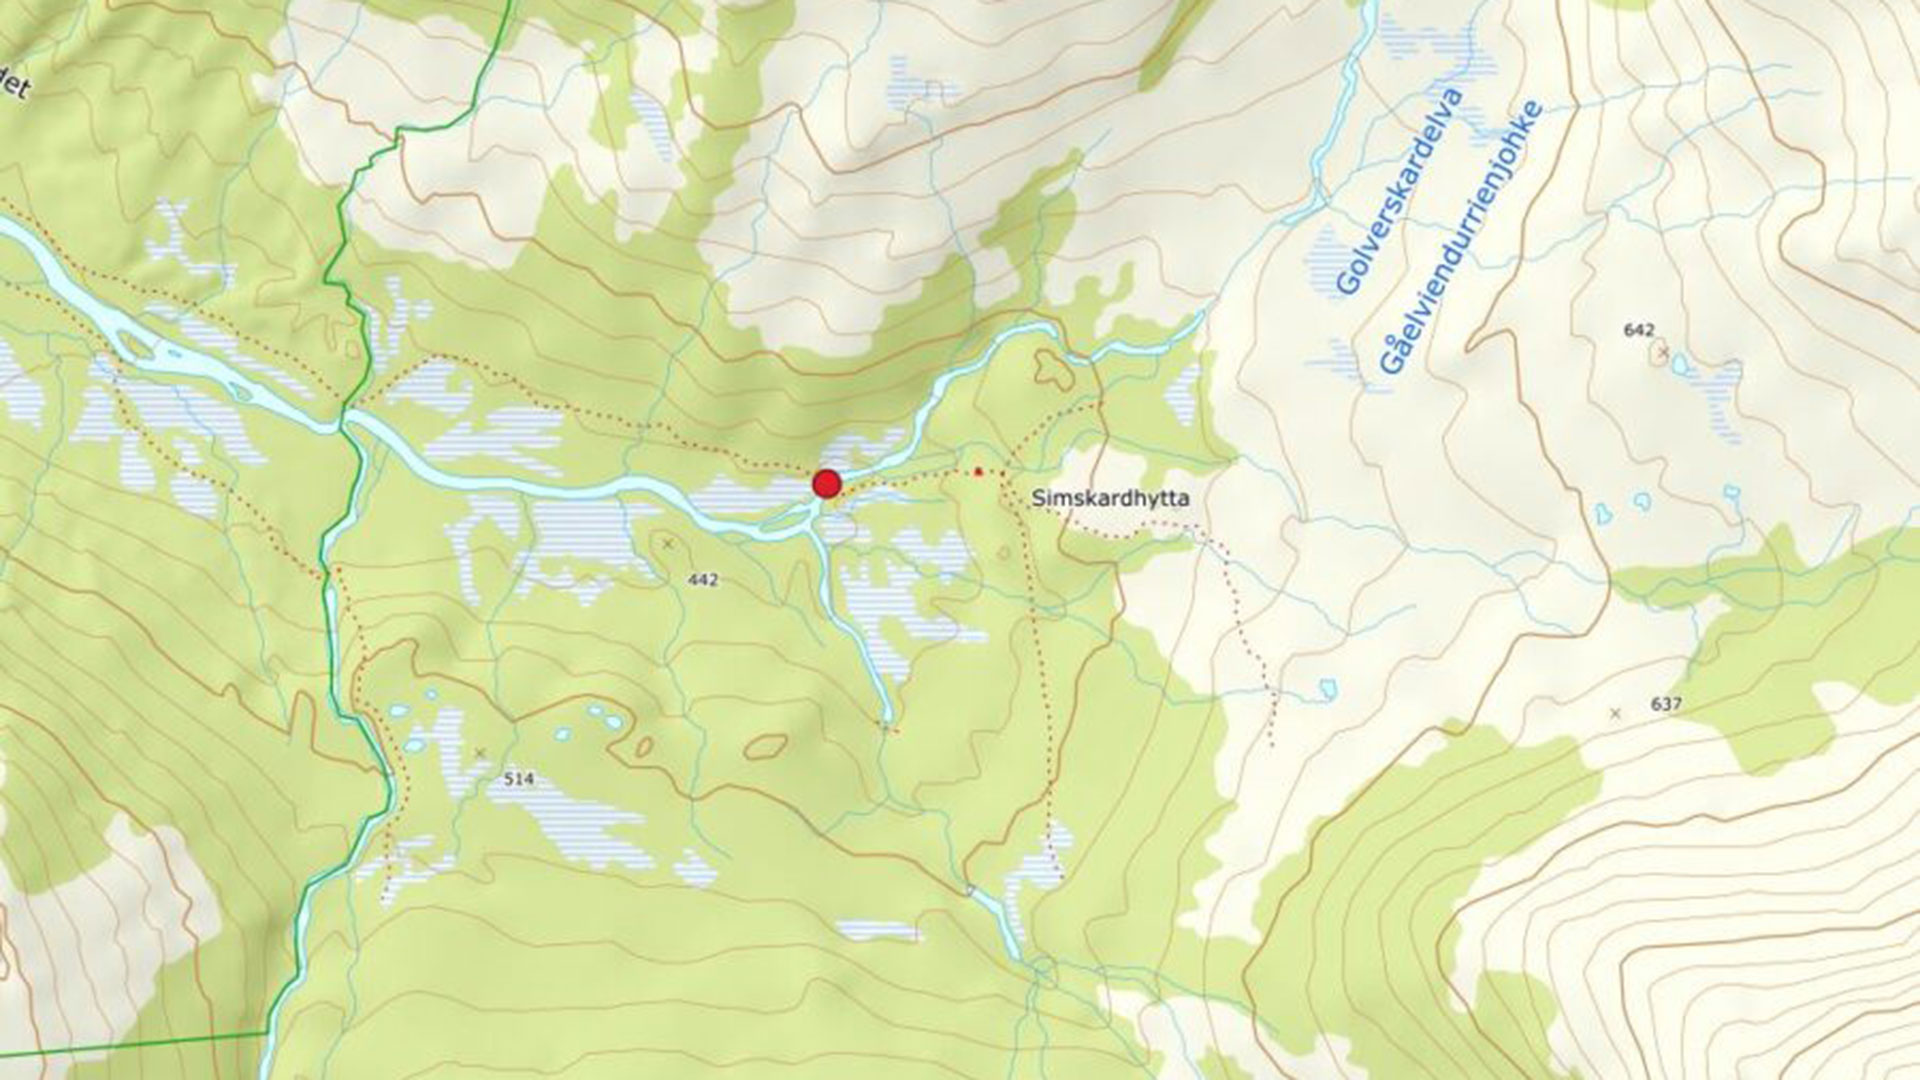 Map showing the location of the bridge over the Golverskardelva